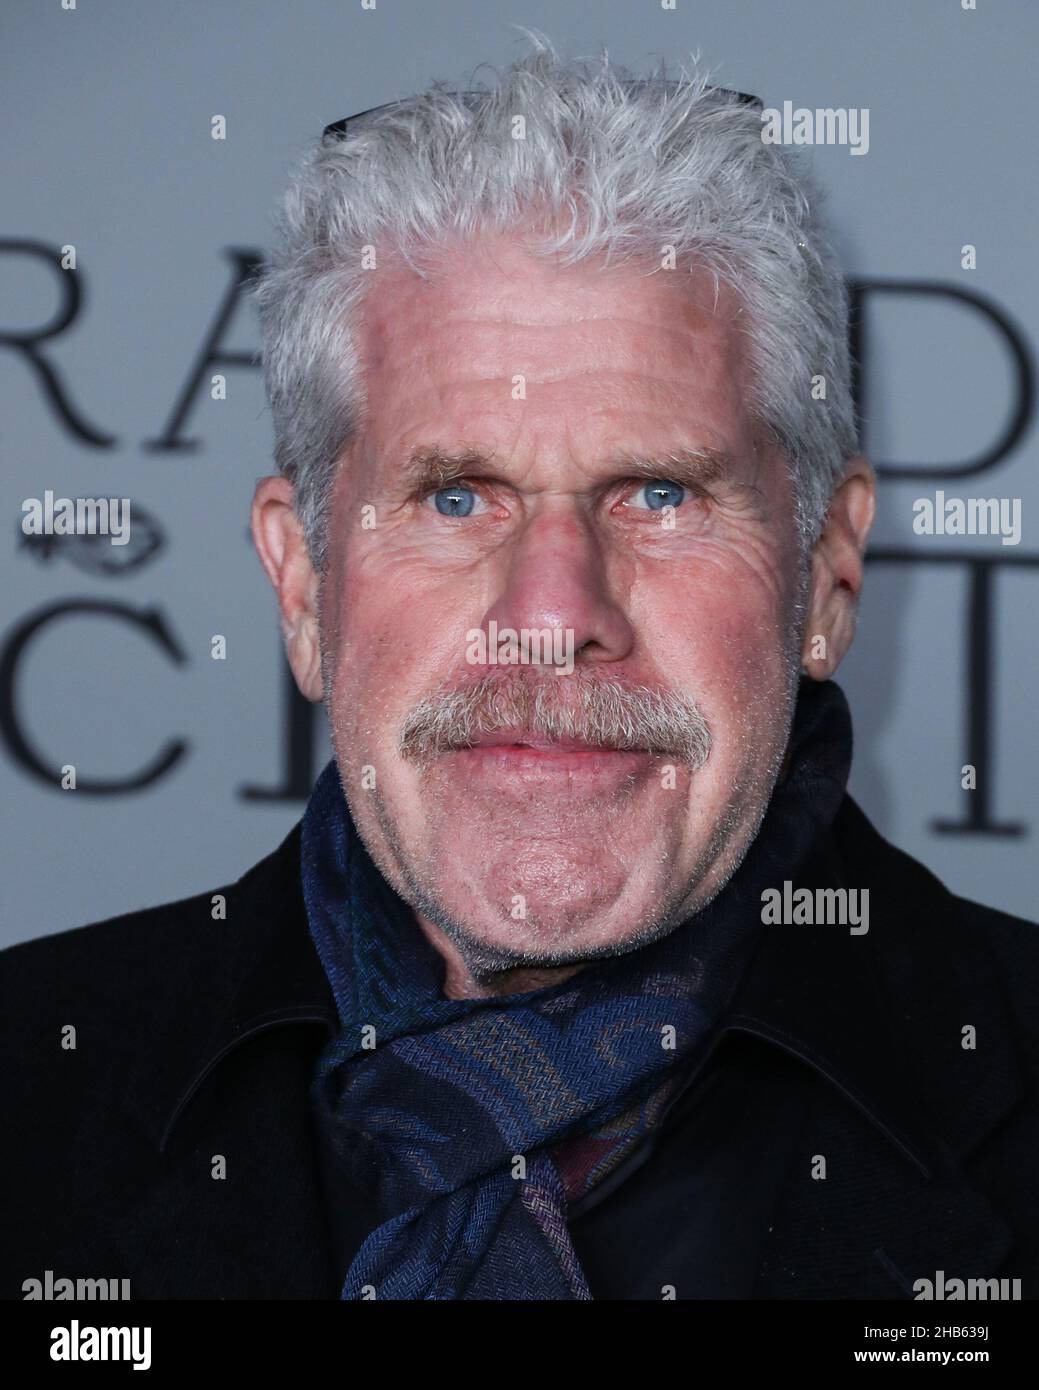 LOS ANGELES, CALIFORNIA, USA - DECEMBER 16: American actor Ron Perlman arrives at the Los Angeles Premiere Of Apple Original Films' and A24's 'The Tragedy Of Macbeth' held at the Directors Guild of America Theater Complex on December 16, 2021 in Los Angeles, California, USA. (Photo by Xavier Collin/Image Press Agency) Stock Photo